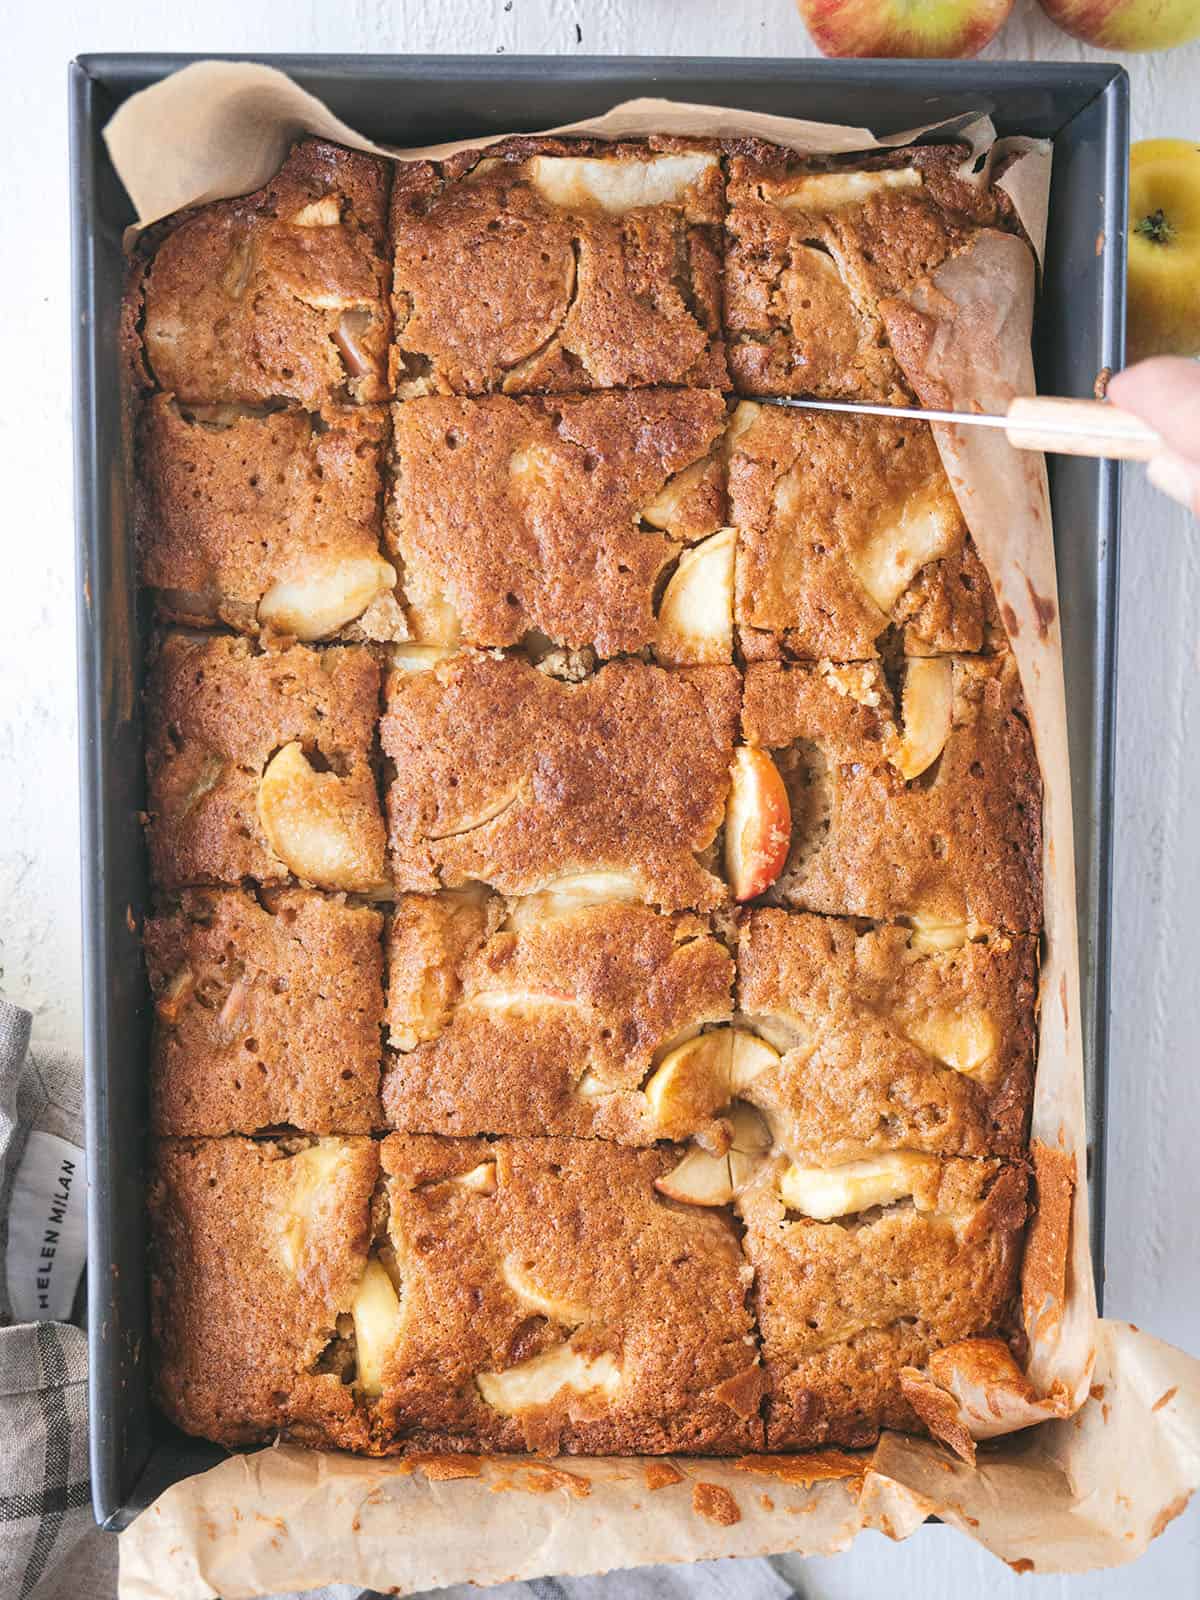 A baked apple cake in a parchment lined pan being cut into squares.